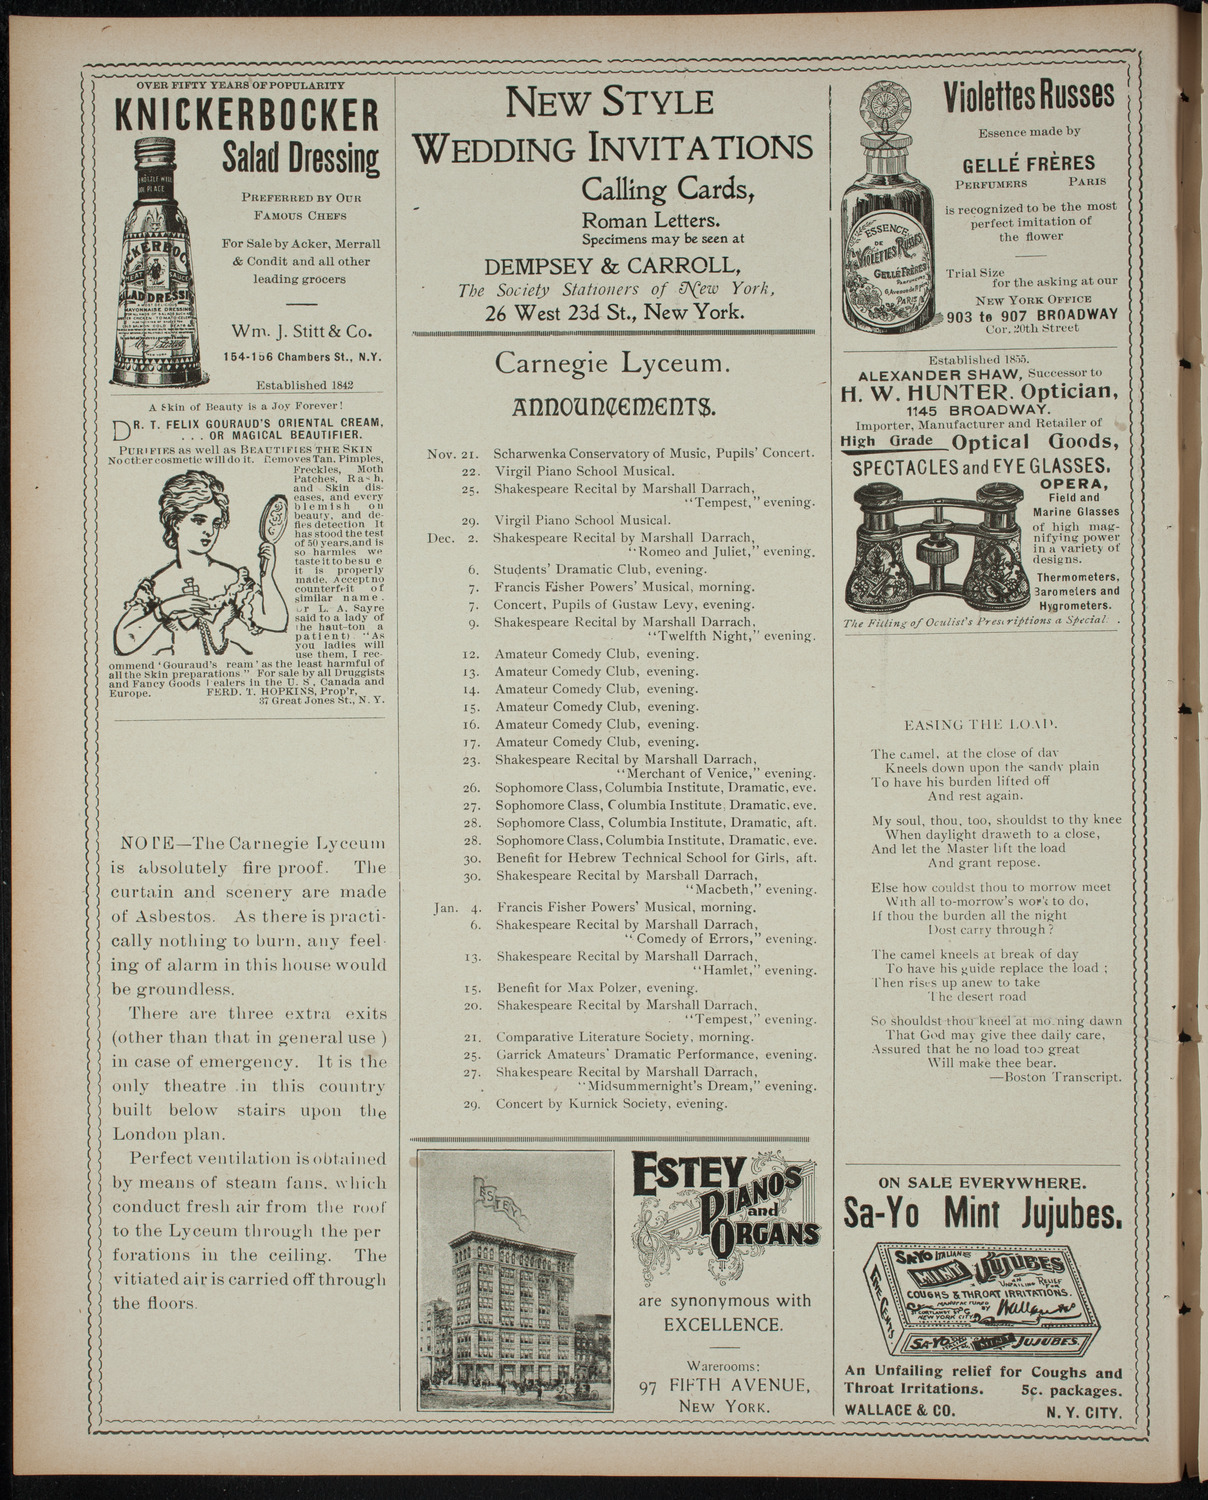 Isis League of Music and Drama Student Production, November 19, 1898, program page 2